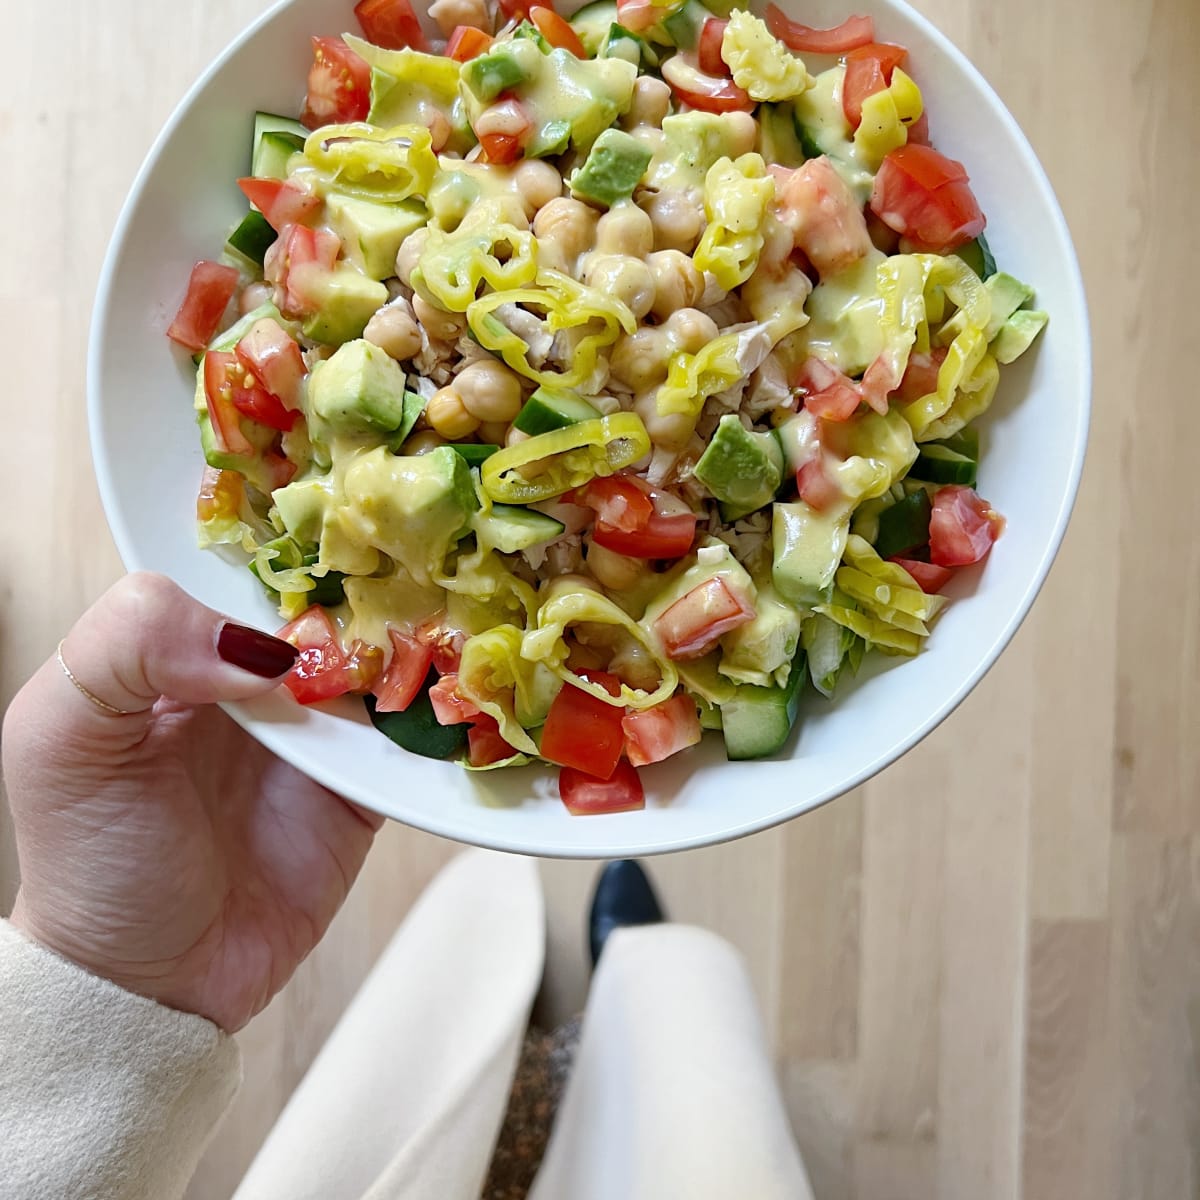 My Everyday Chopped Salad Recipe - Lexi's Clean Kitchen